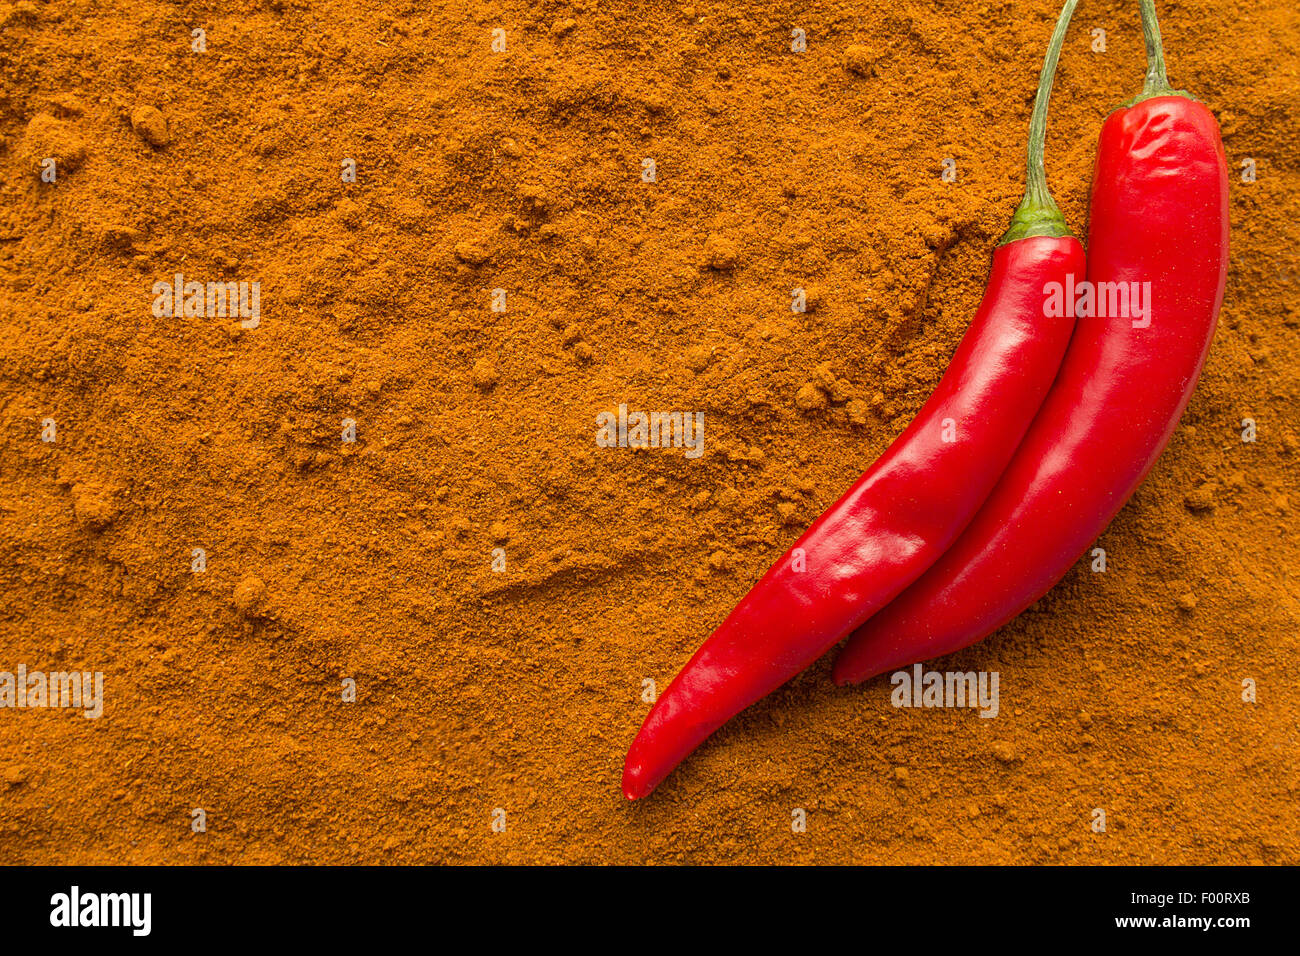 Chili pepper pods on chili powder top view selective focus Stock Photo